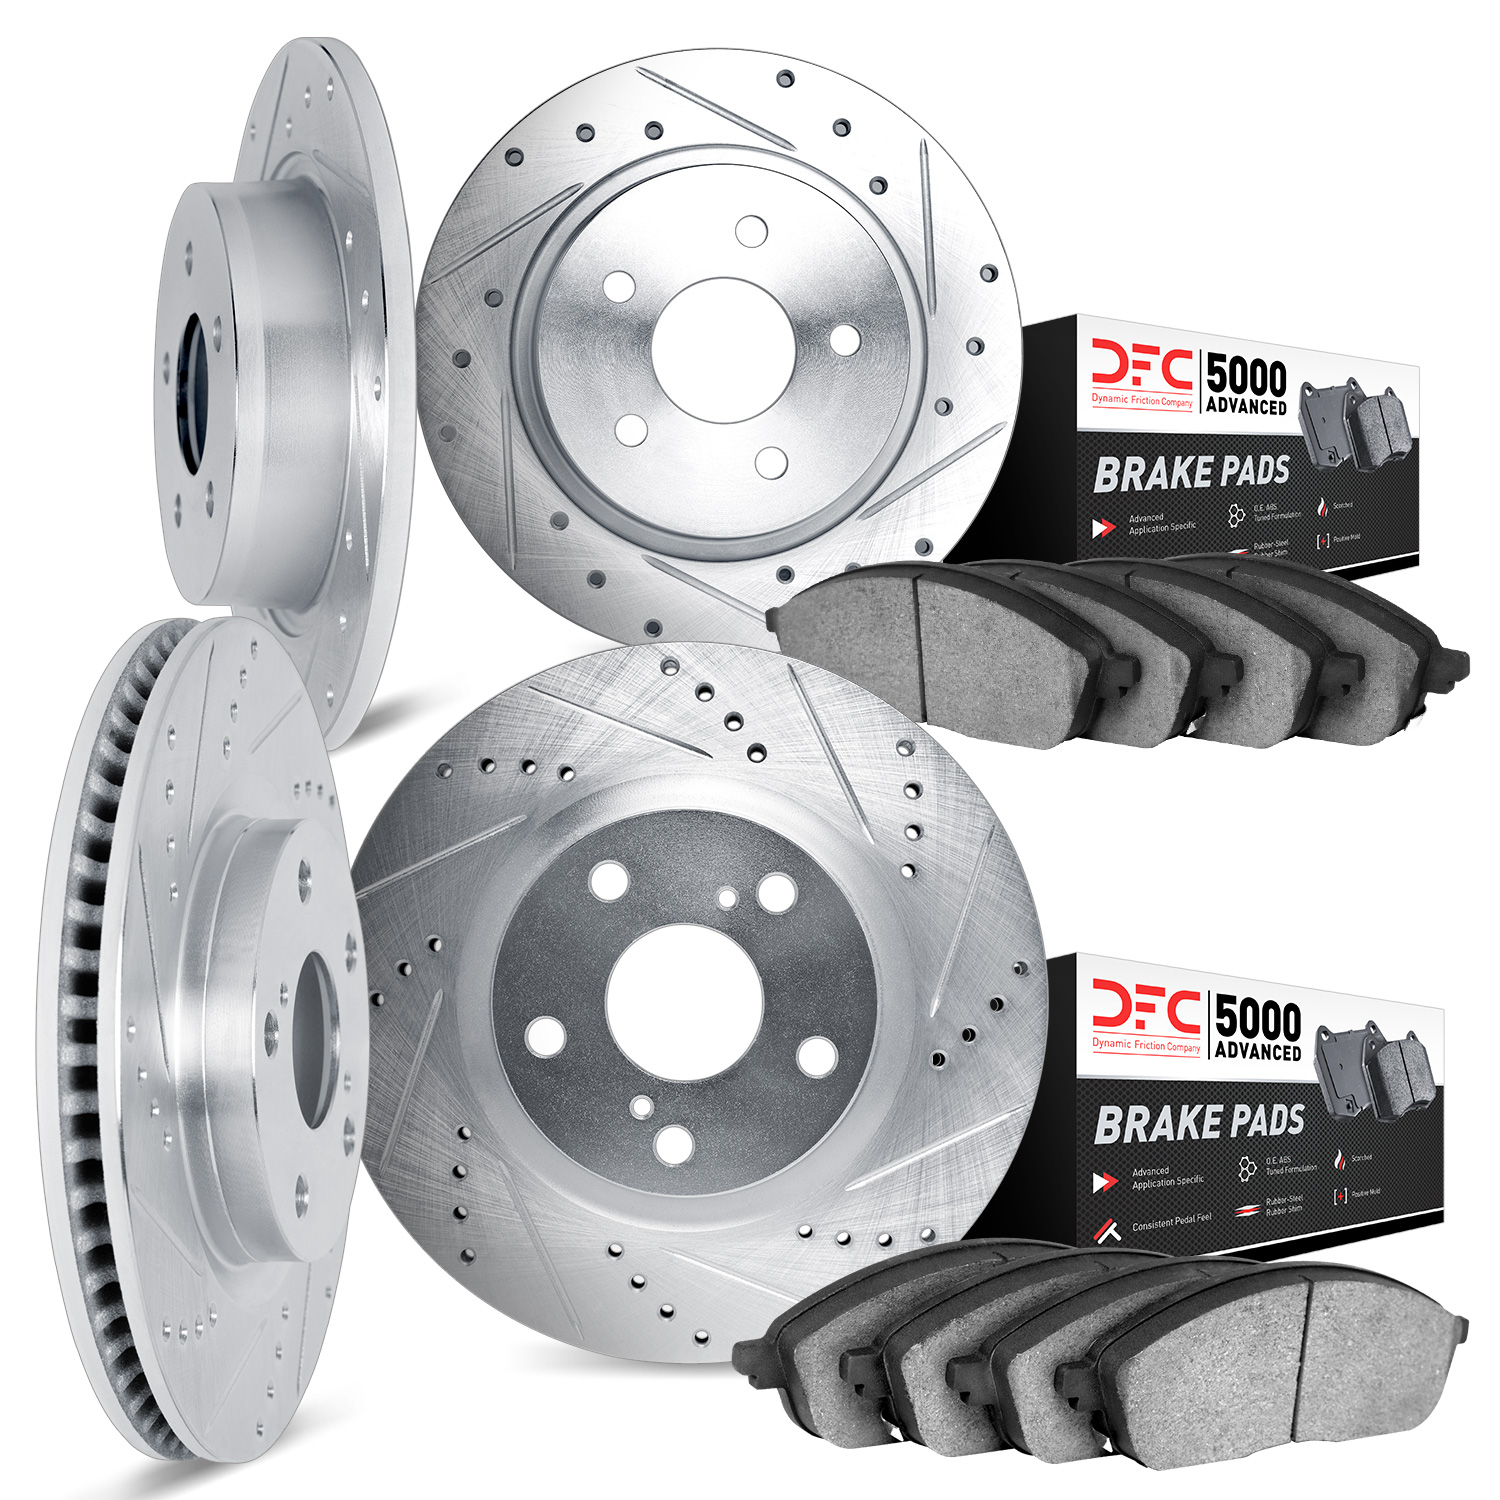 7504-74061 Drilled/Slotted Brake Rotors w/5000 Advanced Brake Pads Kit [Silver], 2011-2014 Audi/Volkswagen, Position: Front and